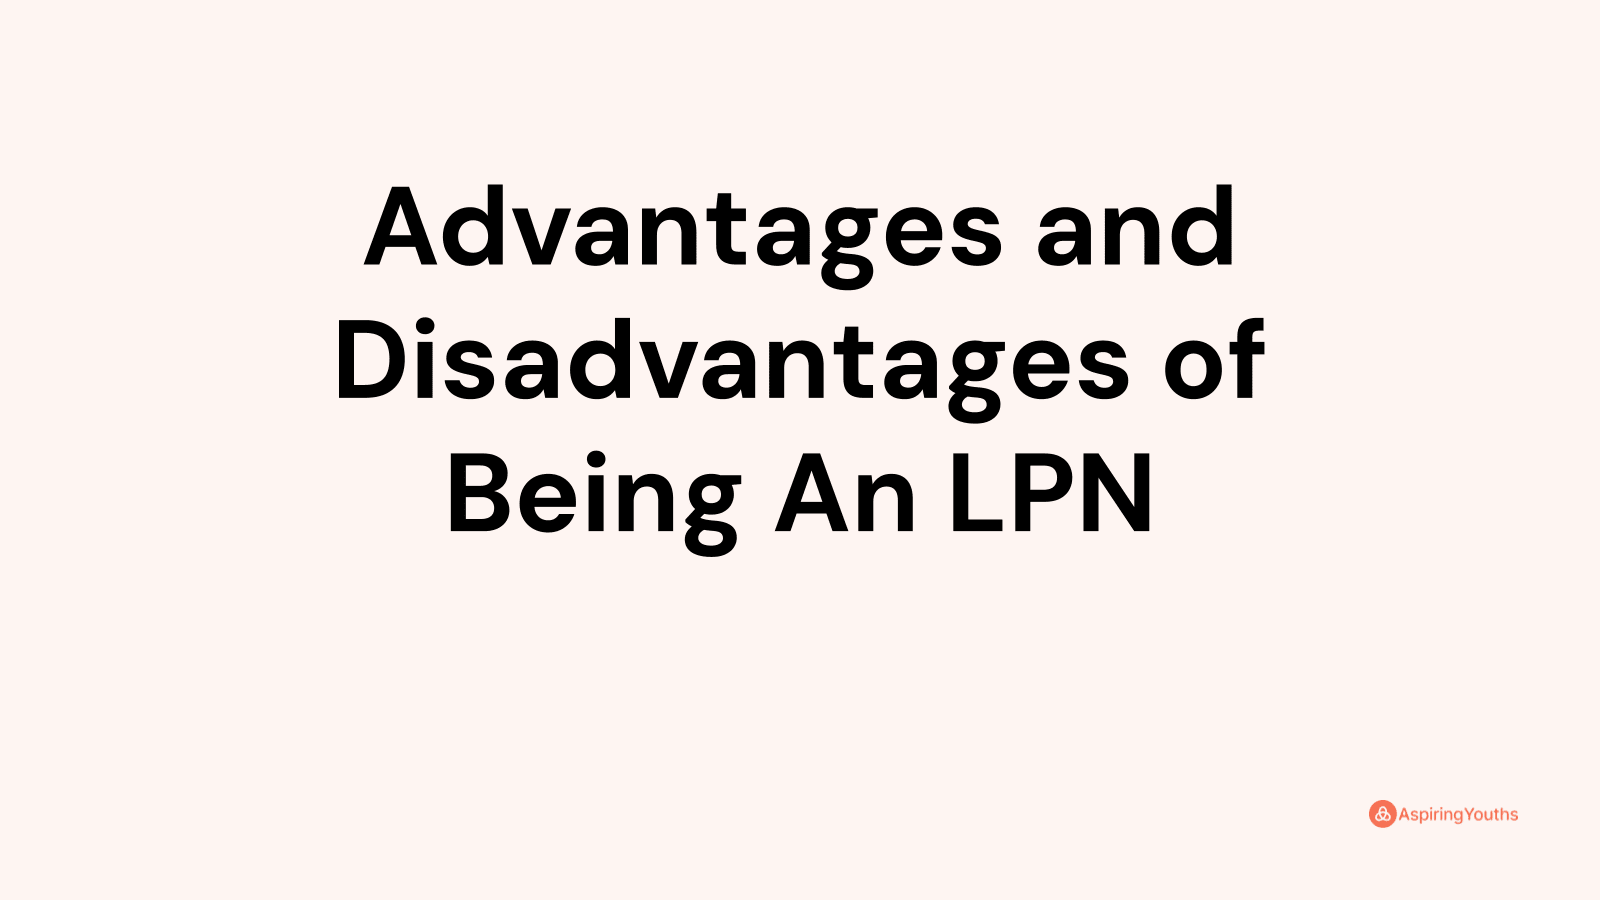 Advantages and disadvantages of Being An LPN